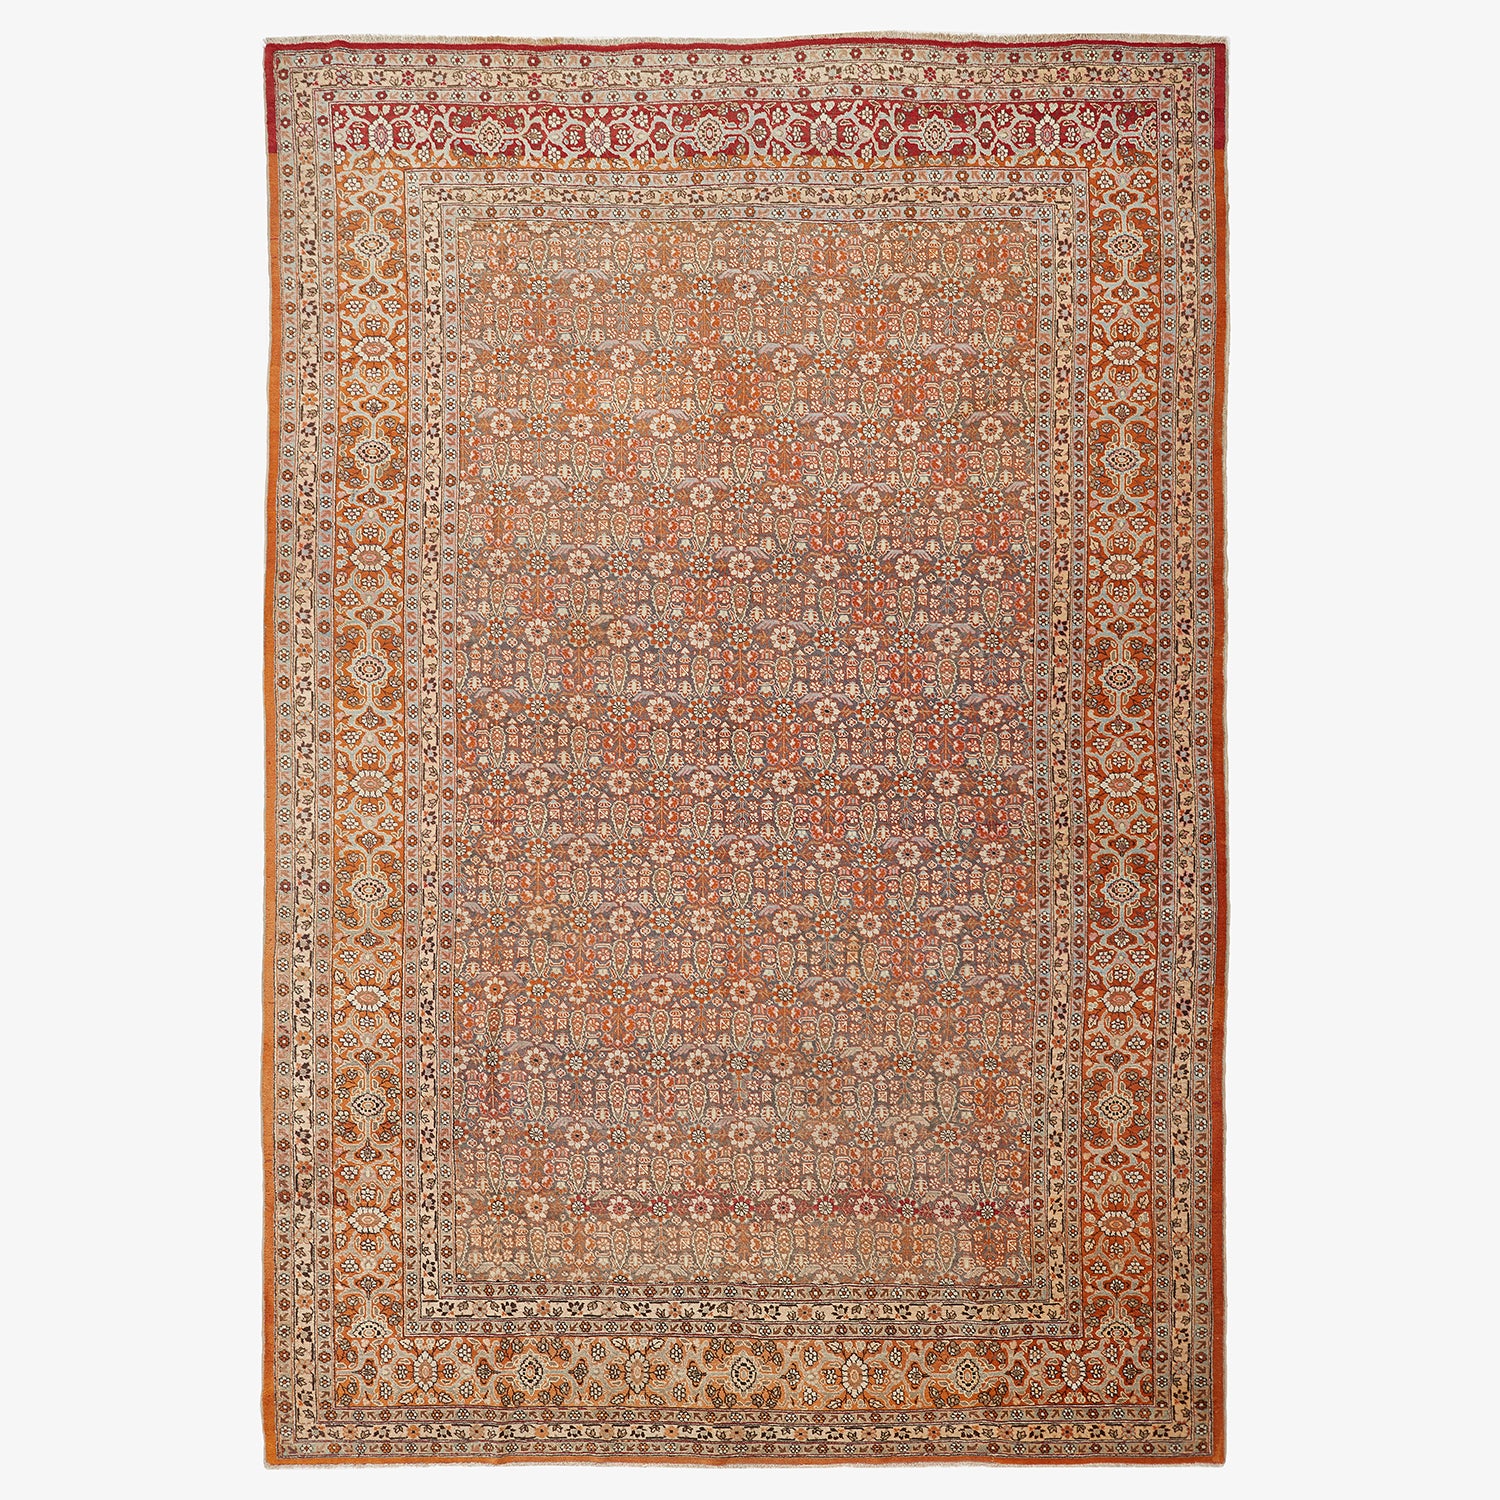 Intricately designed handmade rug with Persian-inspired motifs and warm tones.